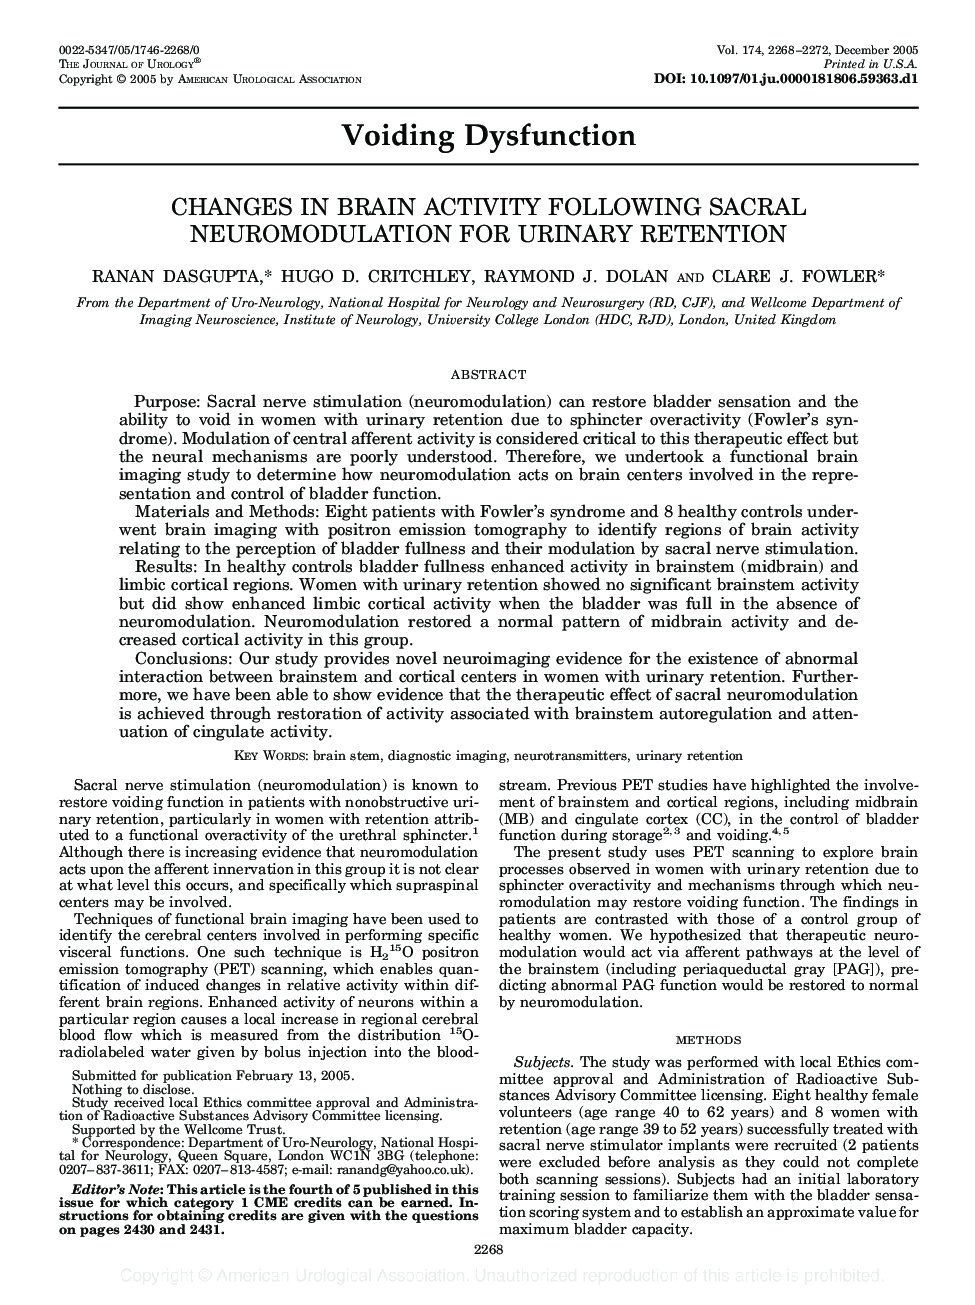 CHANGES IN BRAIN ACTIVITY FOLLOWING SACRAL NEUROMODULATION FOR URINARY RETENTION 